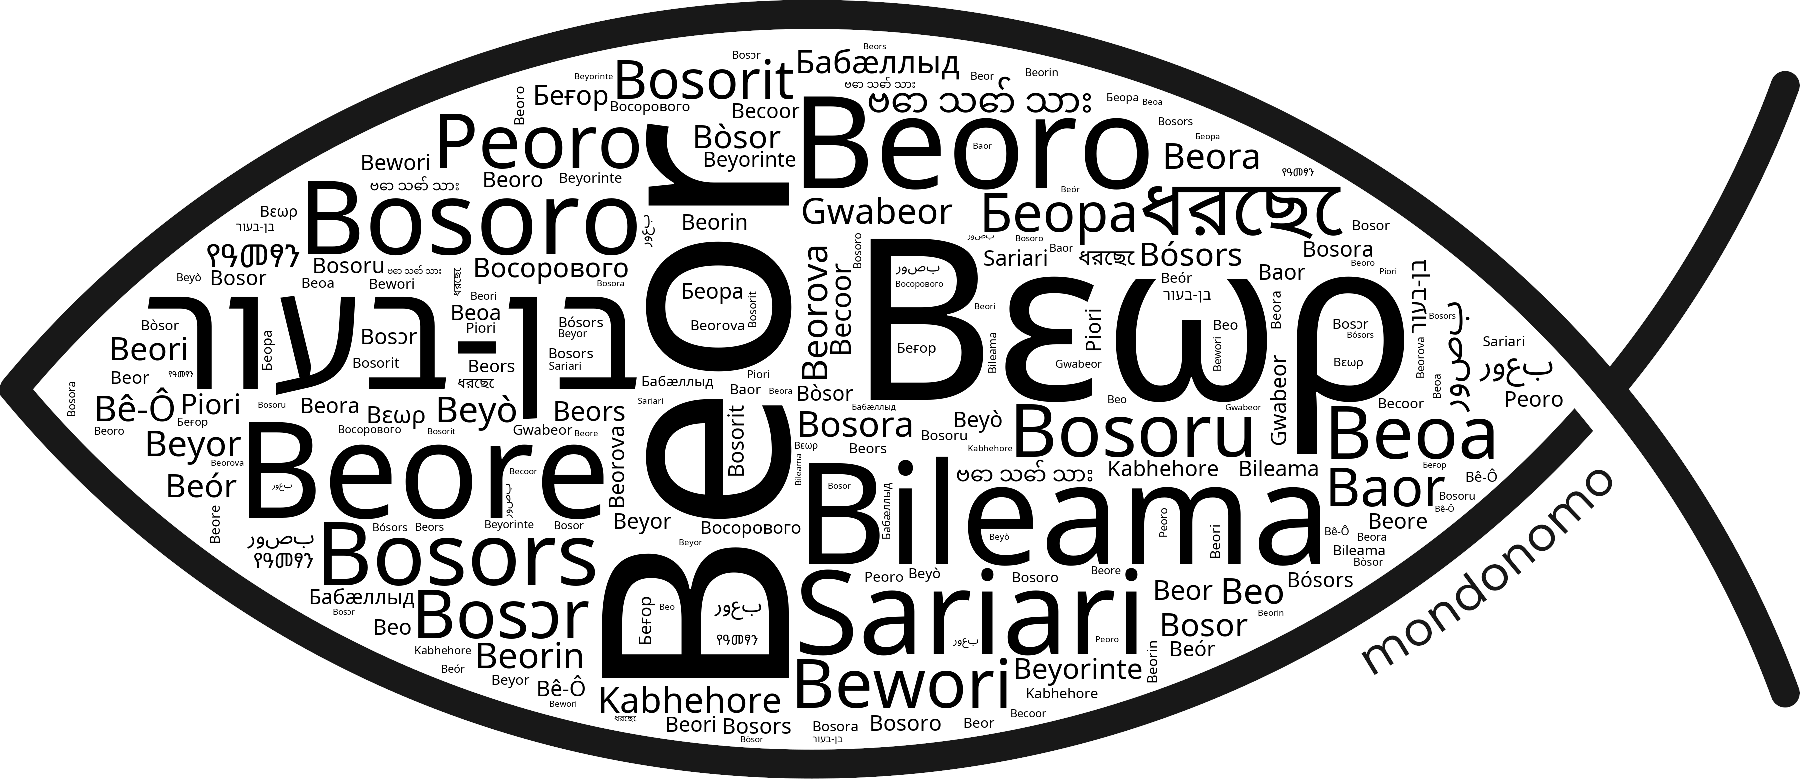 Name Beor in the world's Bibles